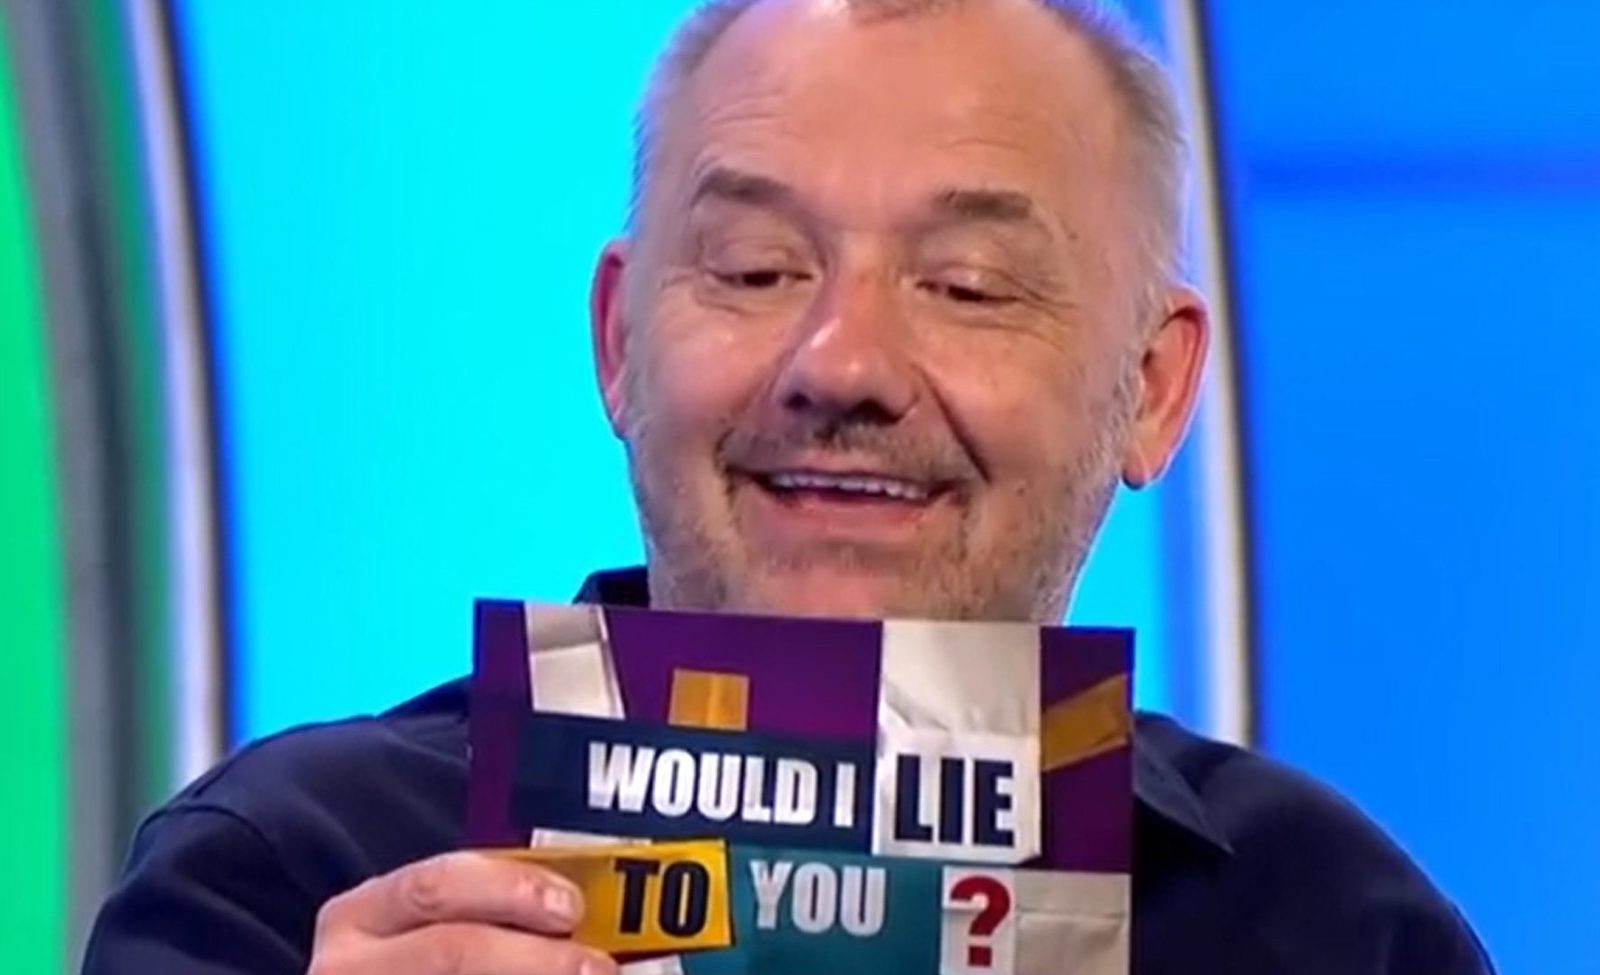 would i lie to you?